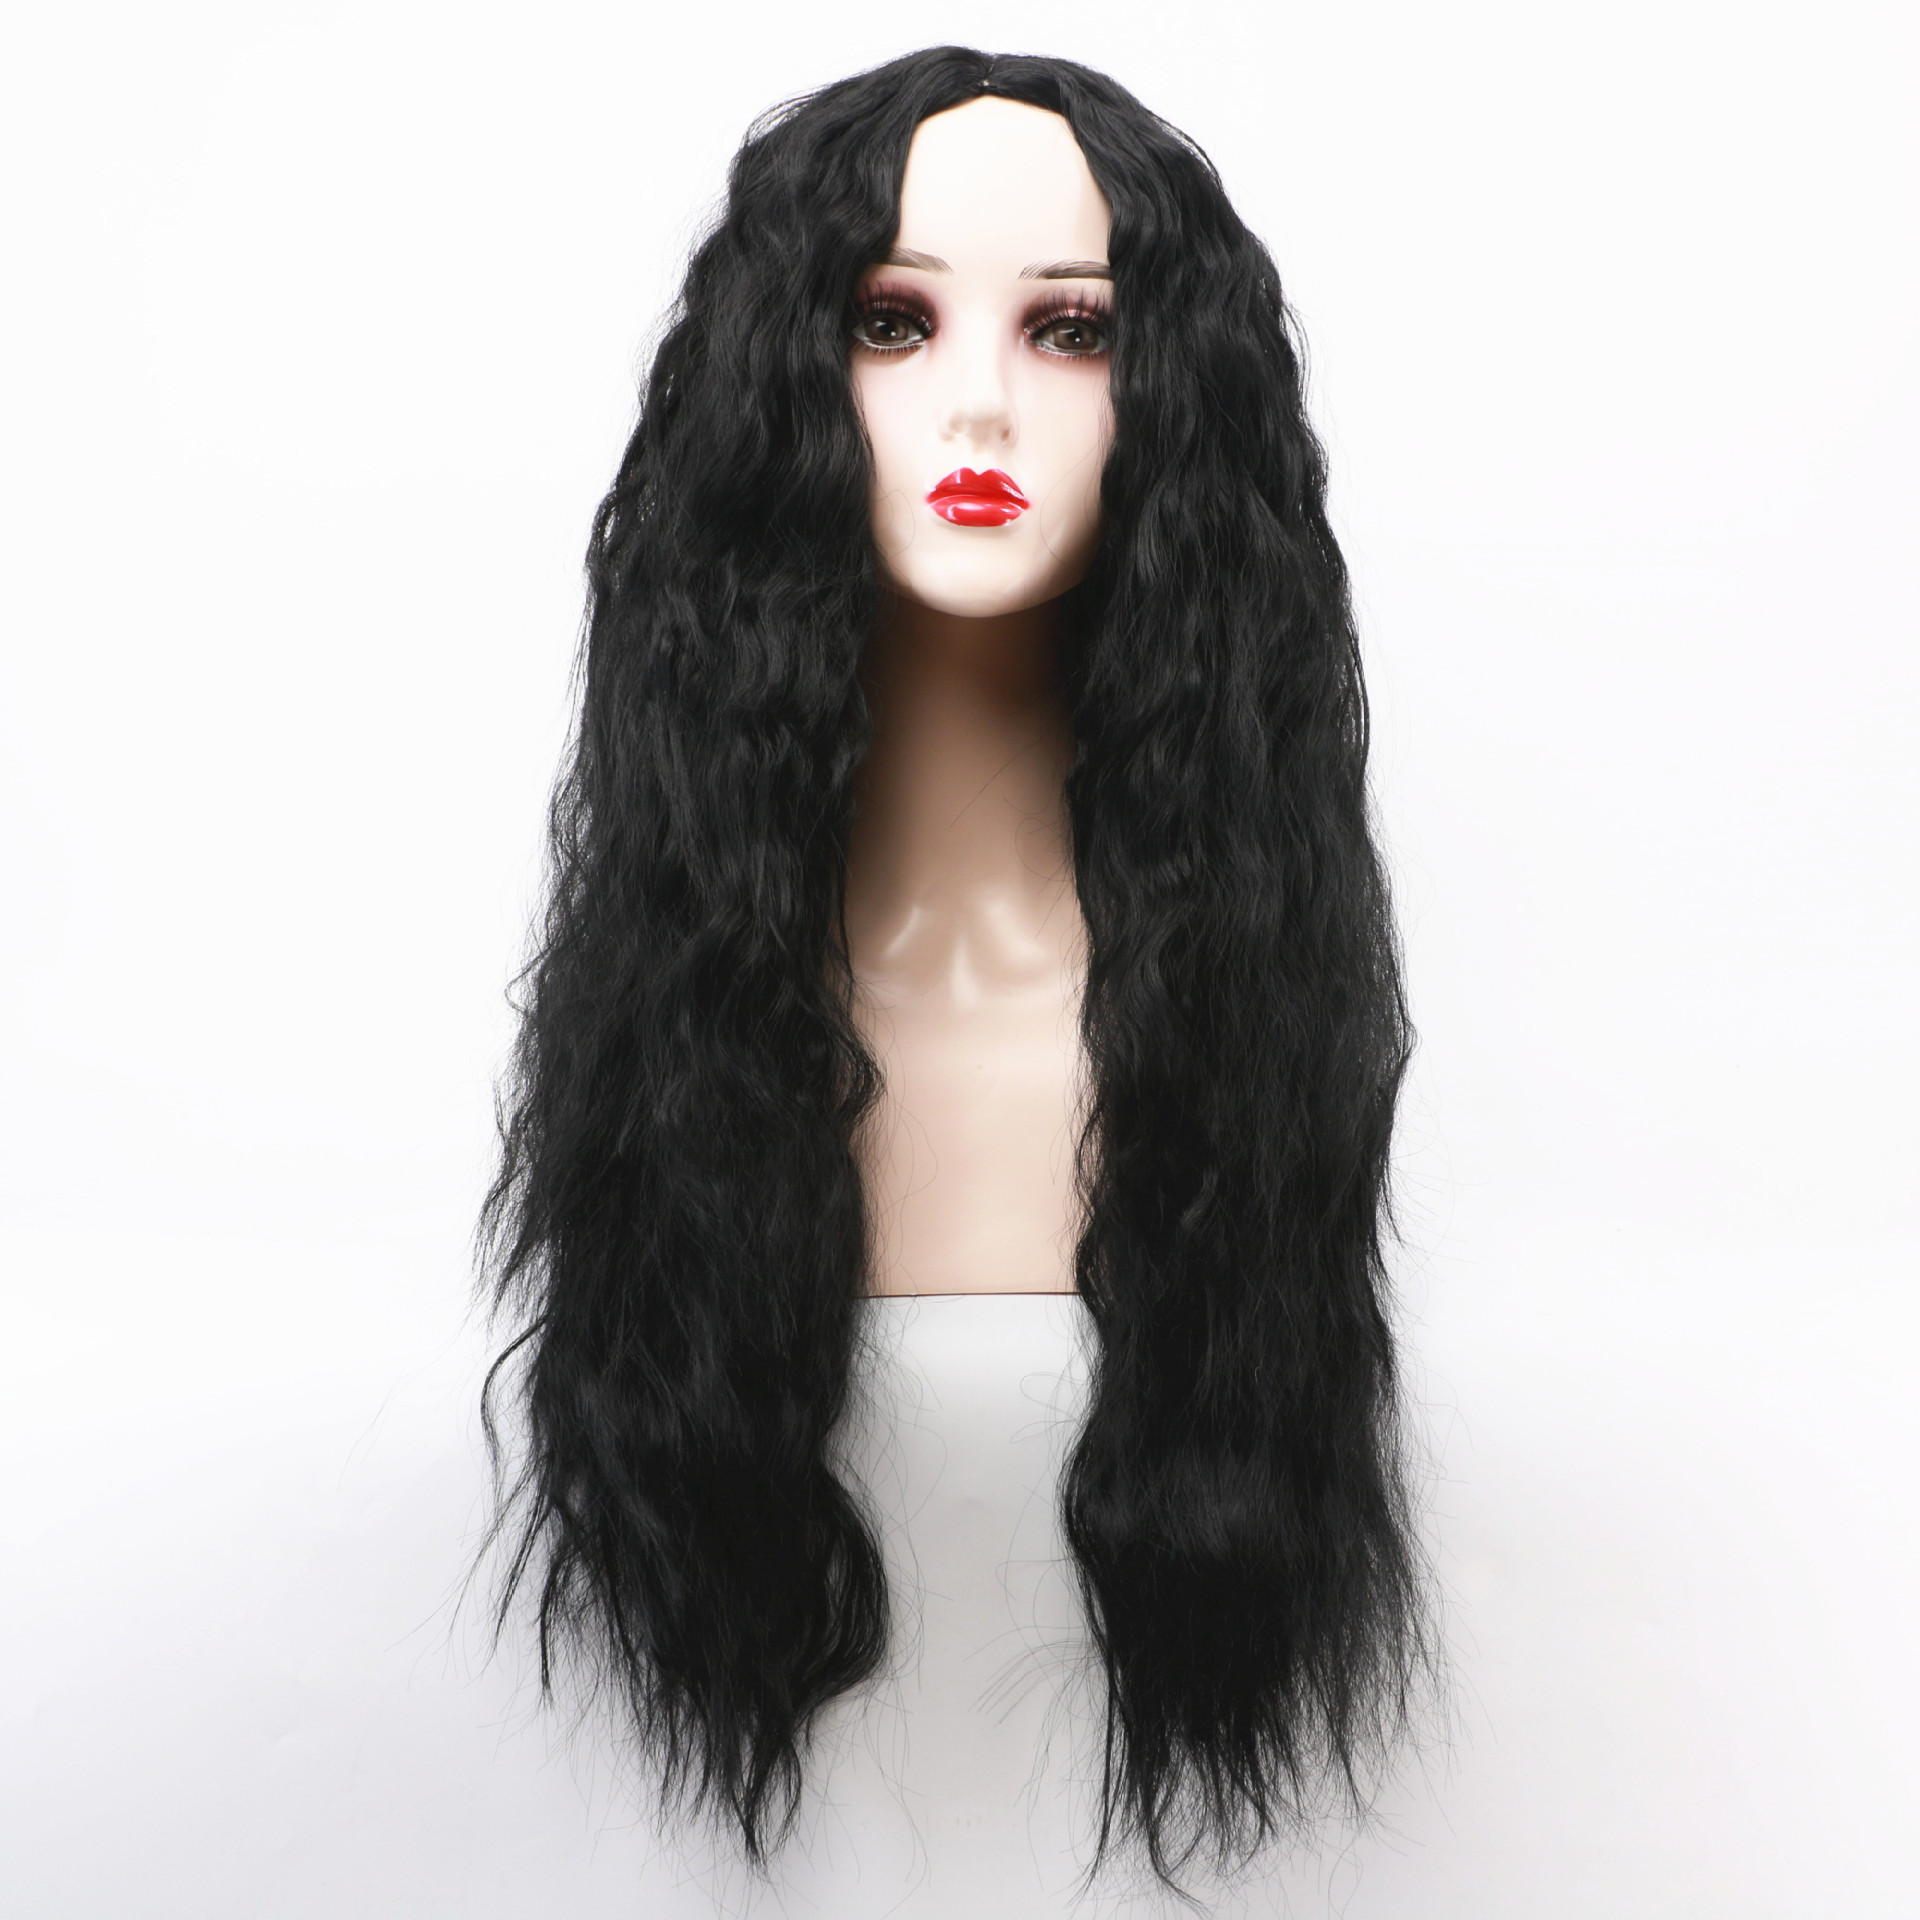 20917 Lady Curly Long Hair Fashion Synthetic Wigs For Women 8 inches
